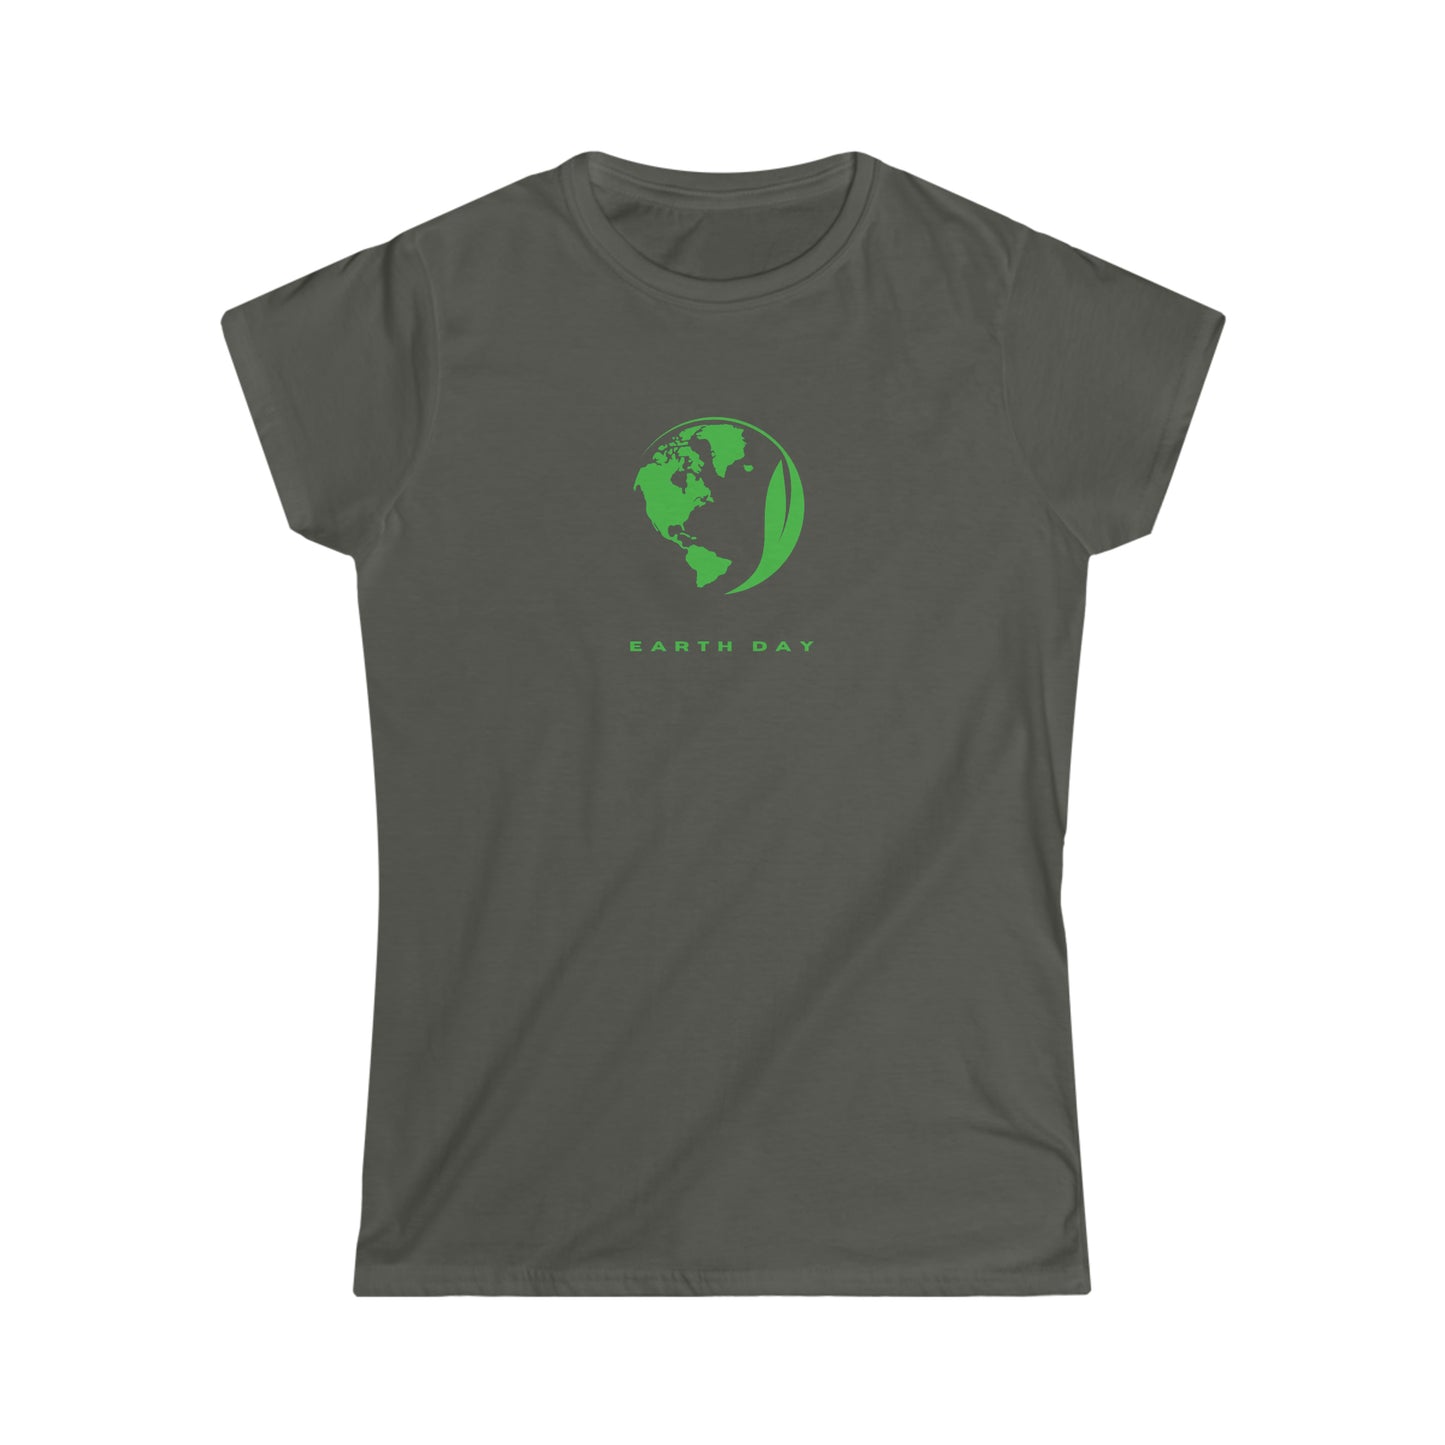 Women's Softstyle Tee - EARTH DAY